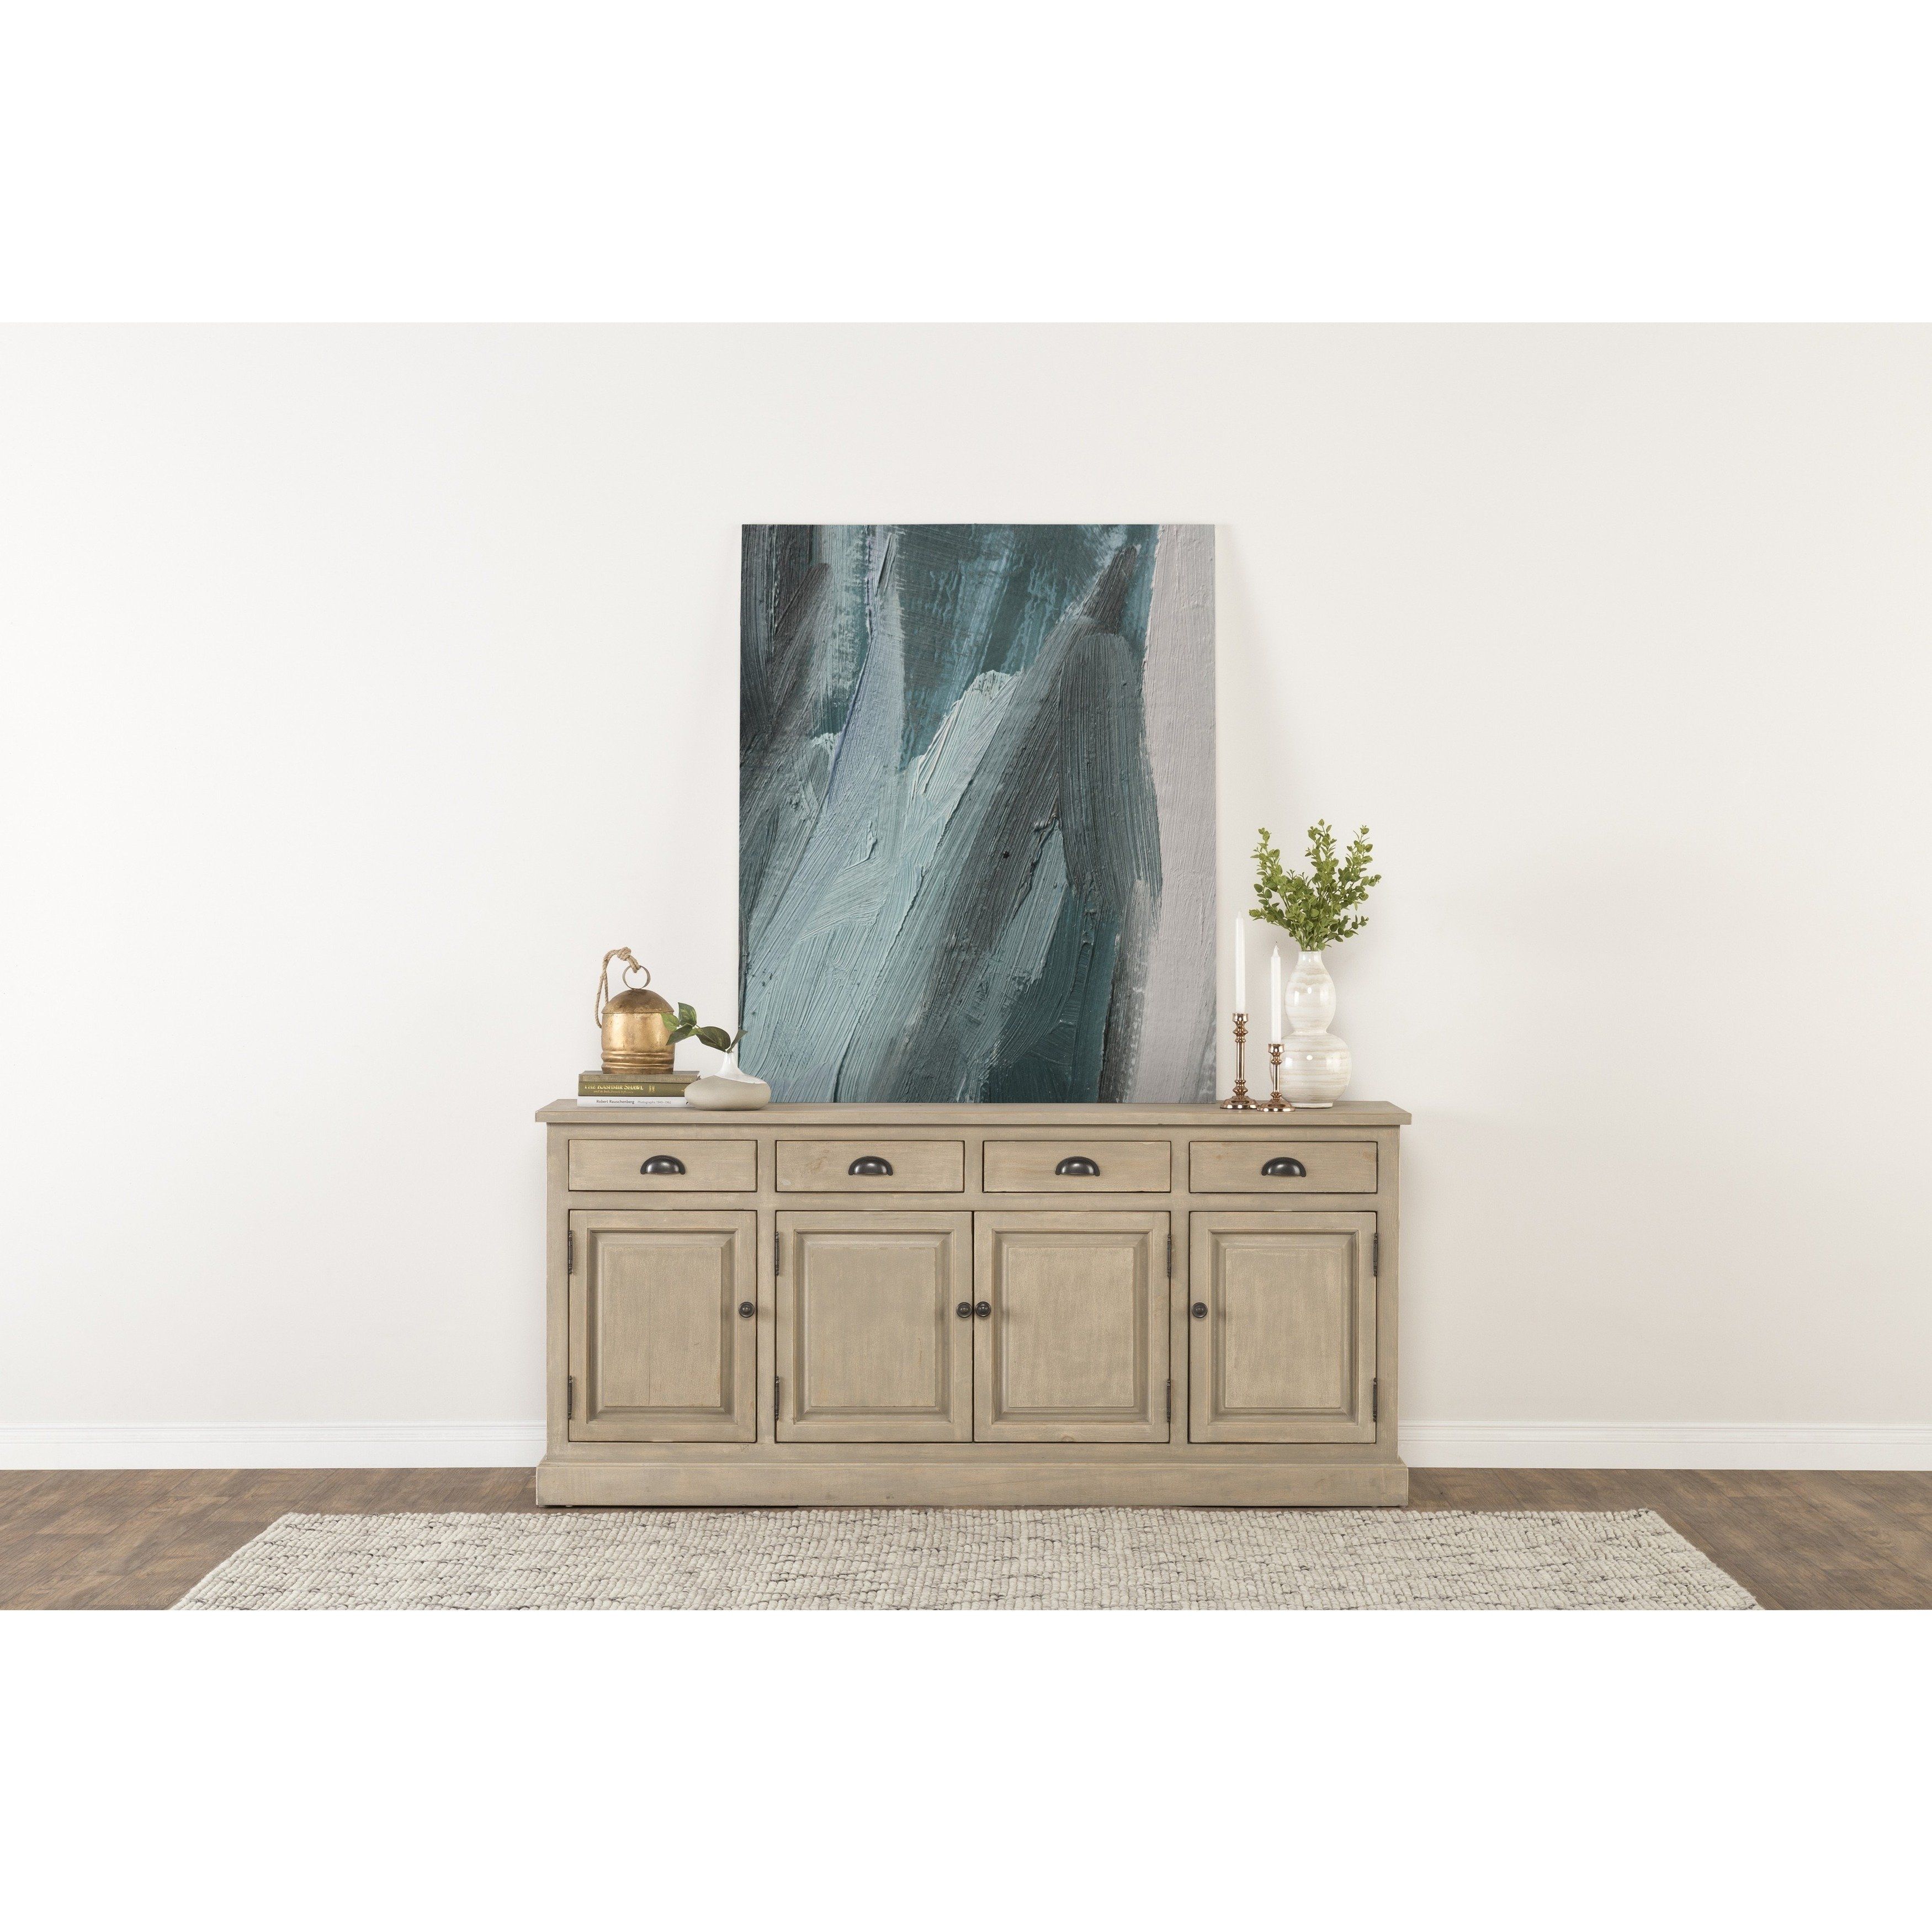 Shop Wilson Reclaimed Wood 79 Inch Sideboardkosas Home – Free Pertaining To Latest Natural Oak Wood 78 Inch Sideboards (View 17 of 20)